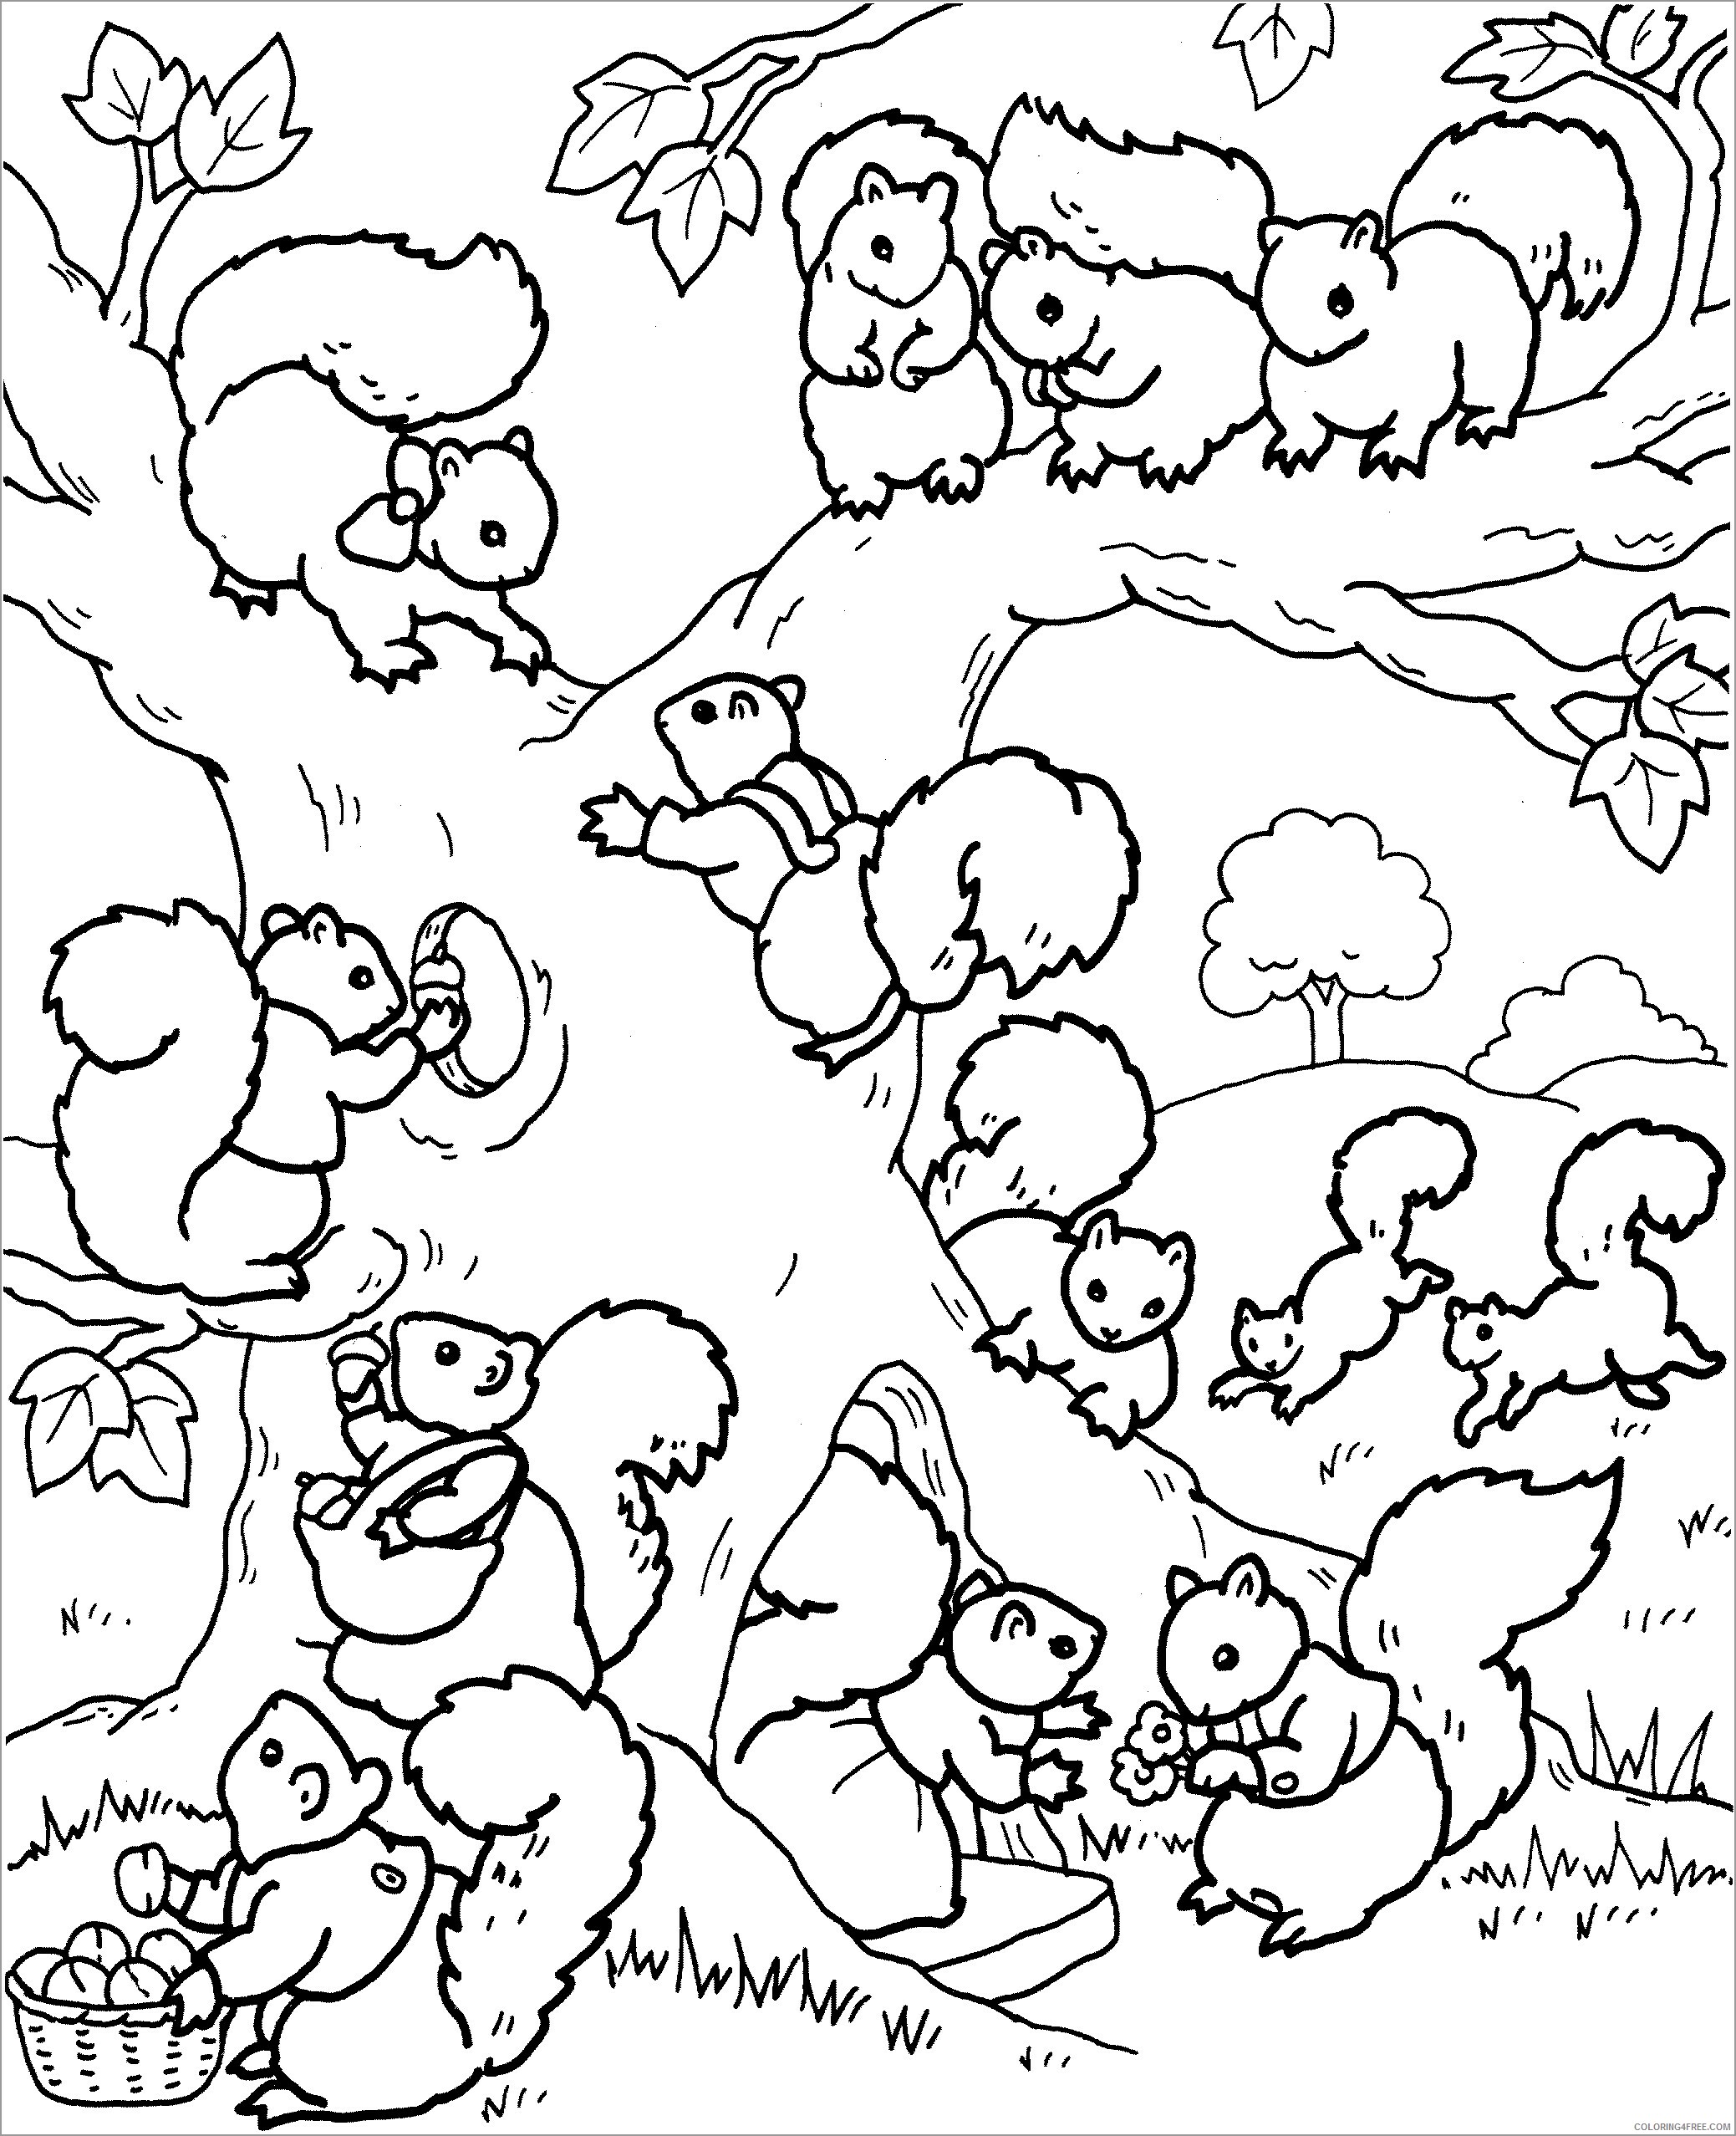 Squirrel Coloring Pages Animal Printable Sheets baby squirrel in a tree 2021 4675 Coloring4free